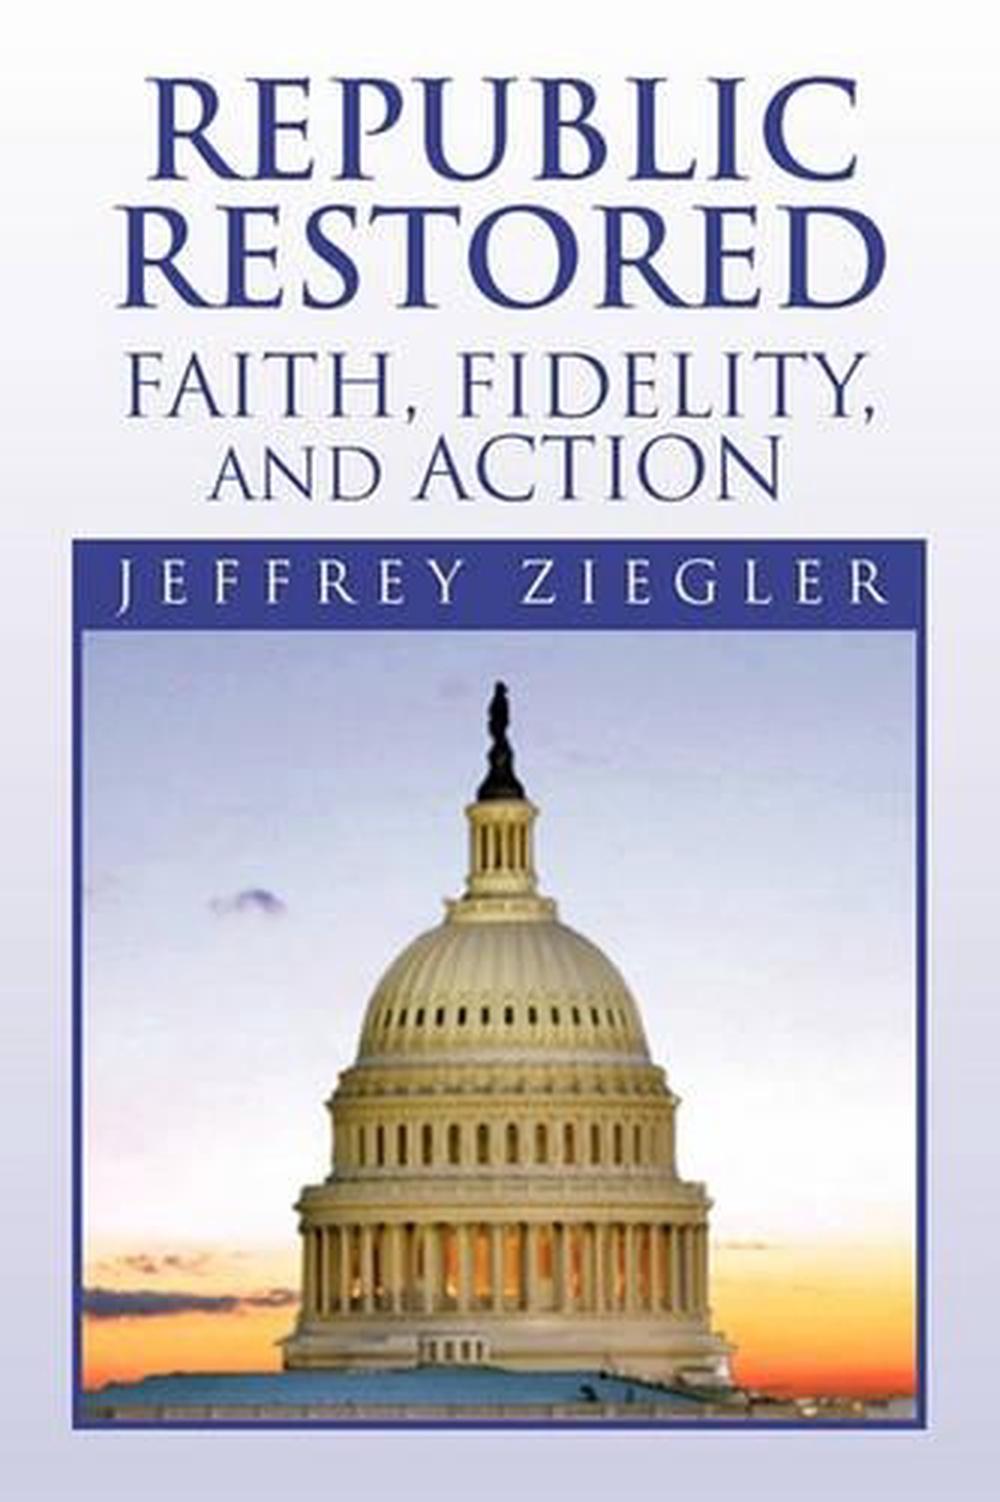 Republic Restored Faith, Fidelity, and Action by Jeffrey Ziegler